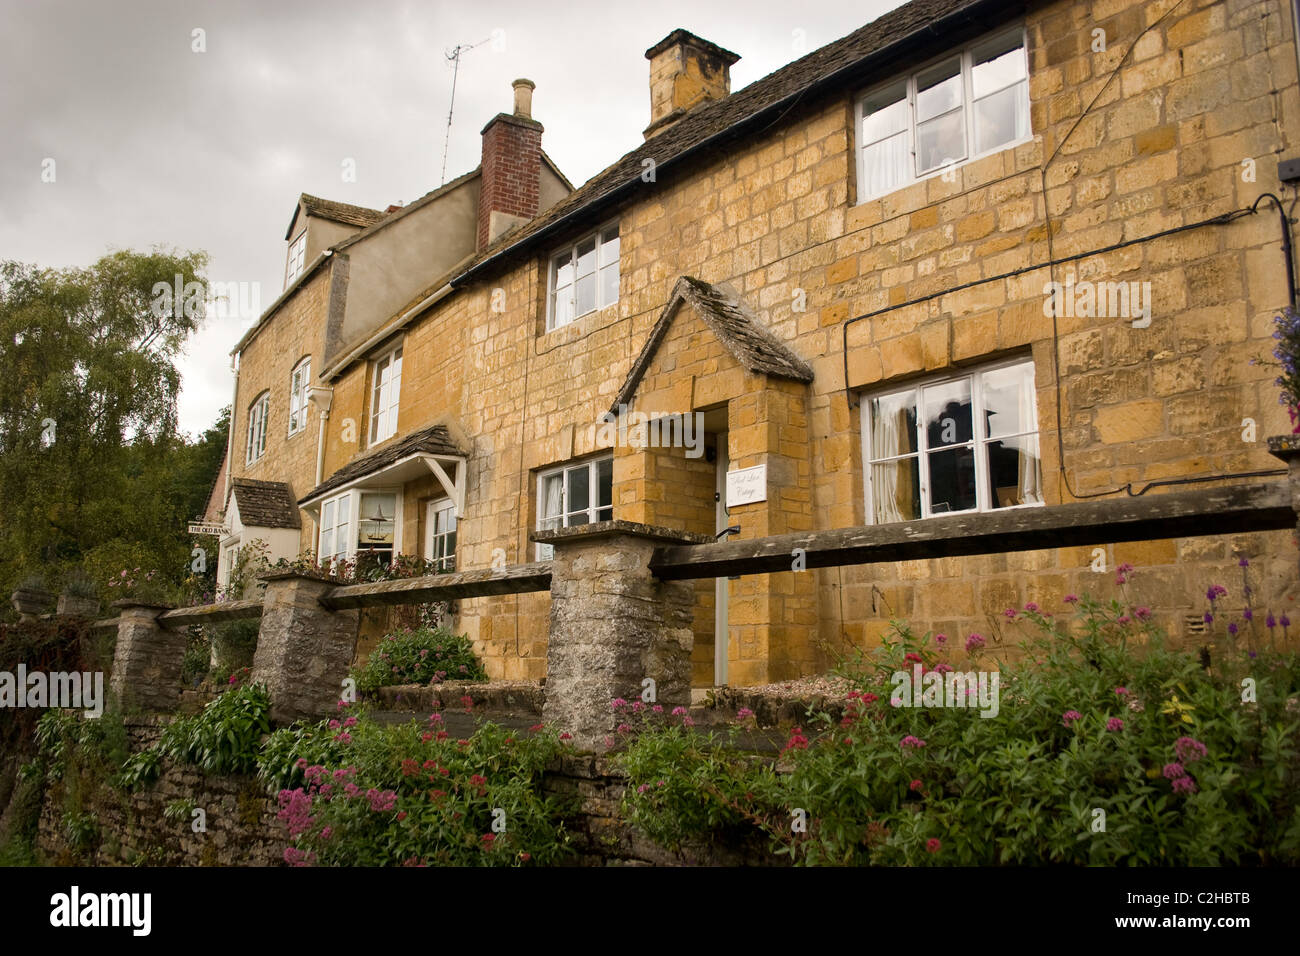 row terrace house stone cotswold structure building flat mortar blocks carved masonry hand crafted wall interlock home quaint Stock Photo